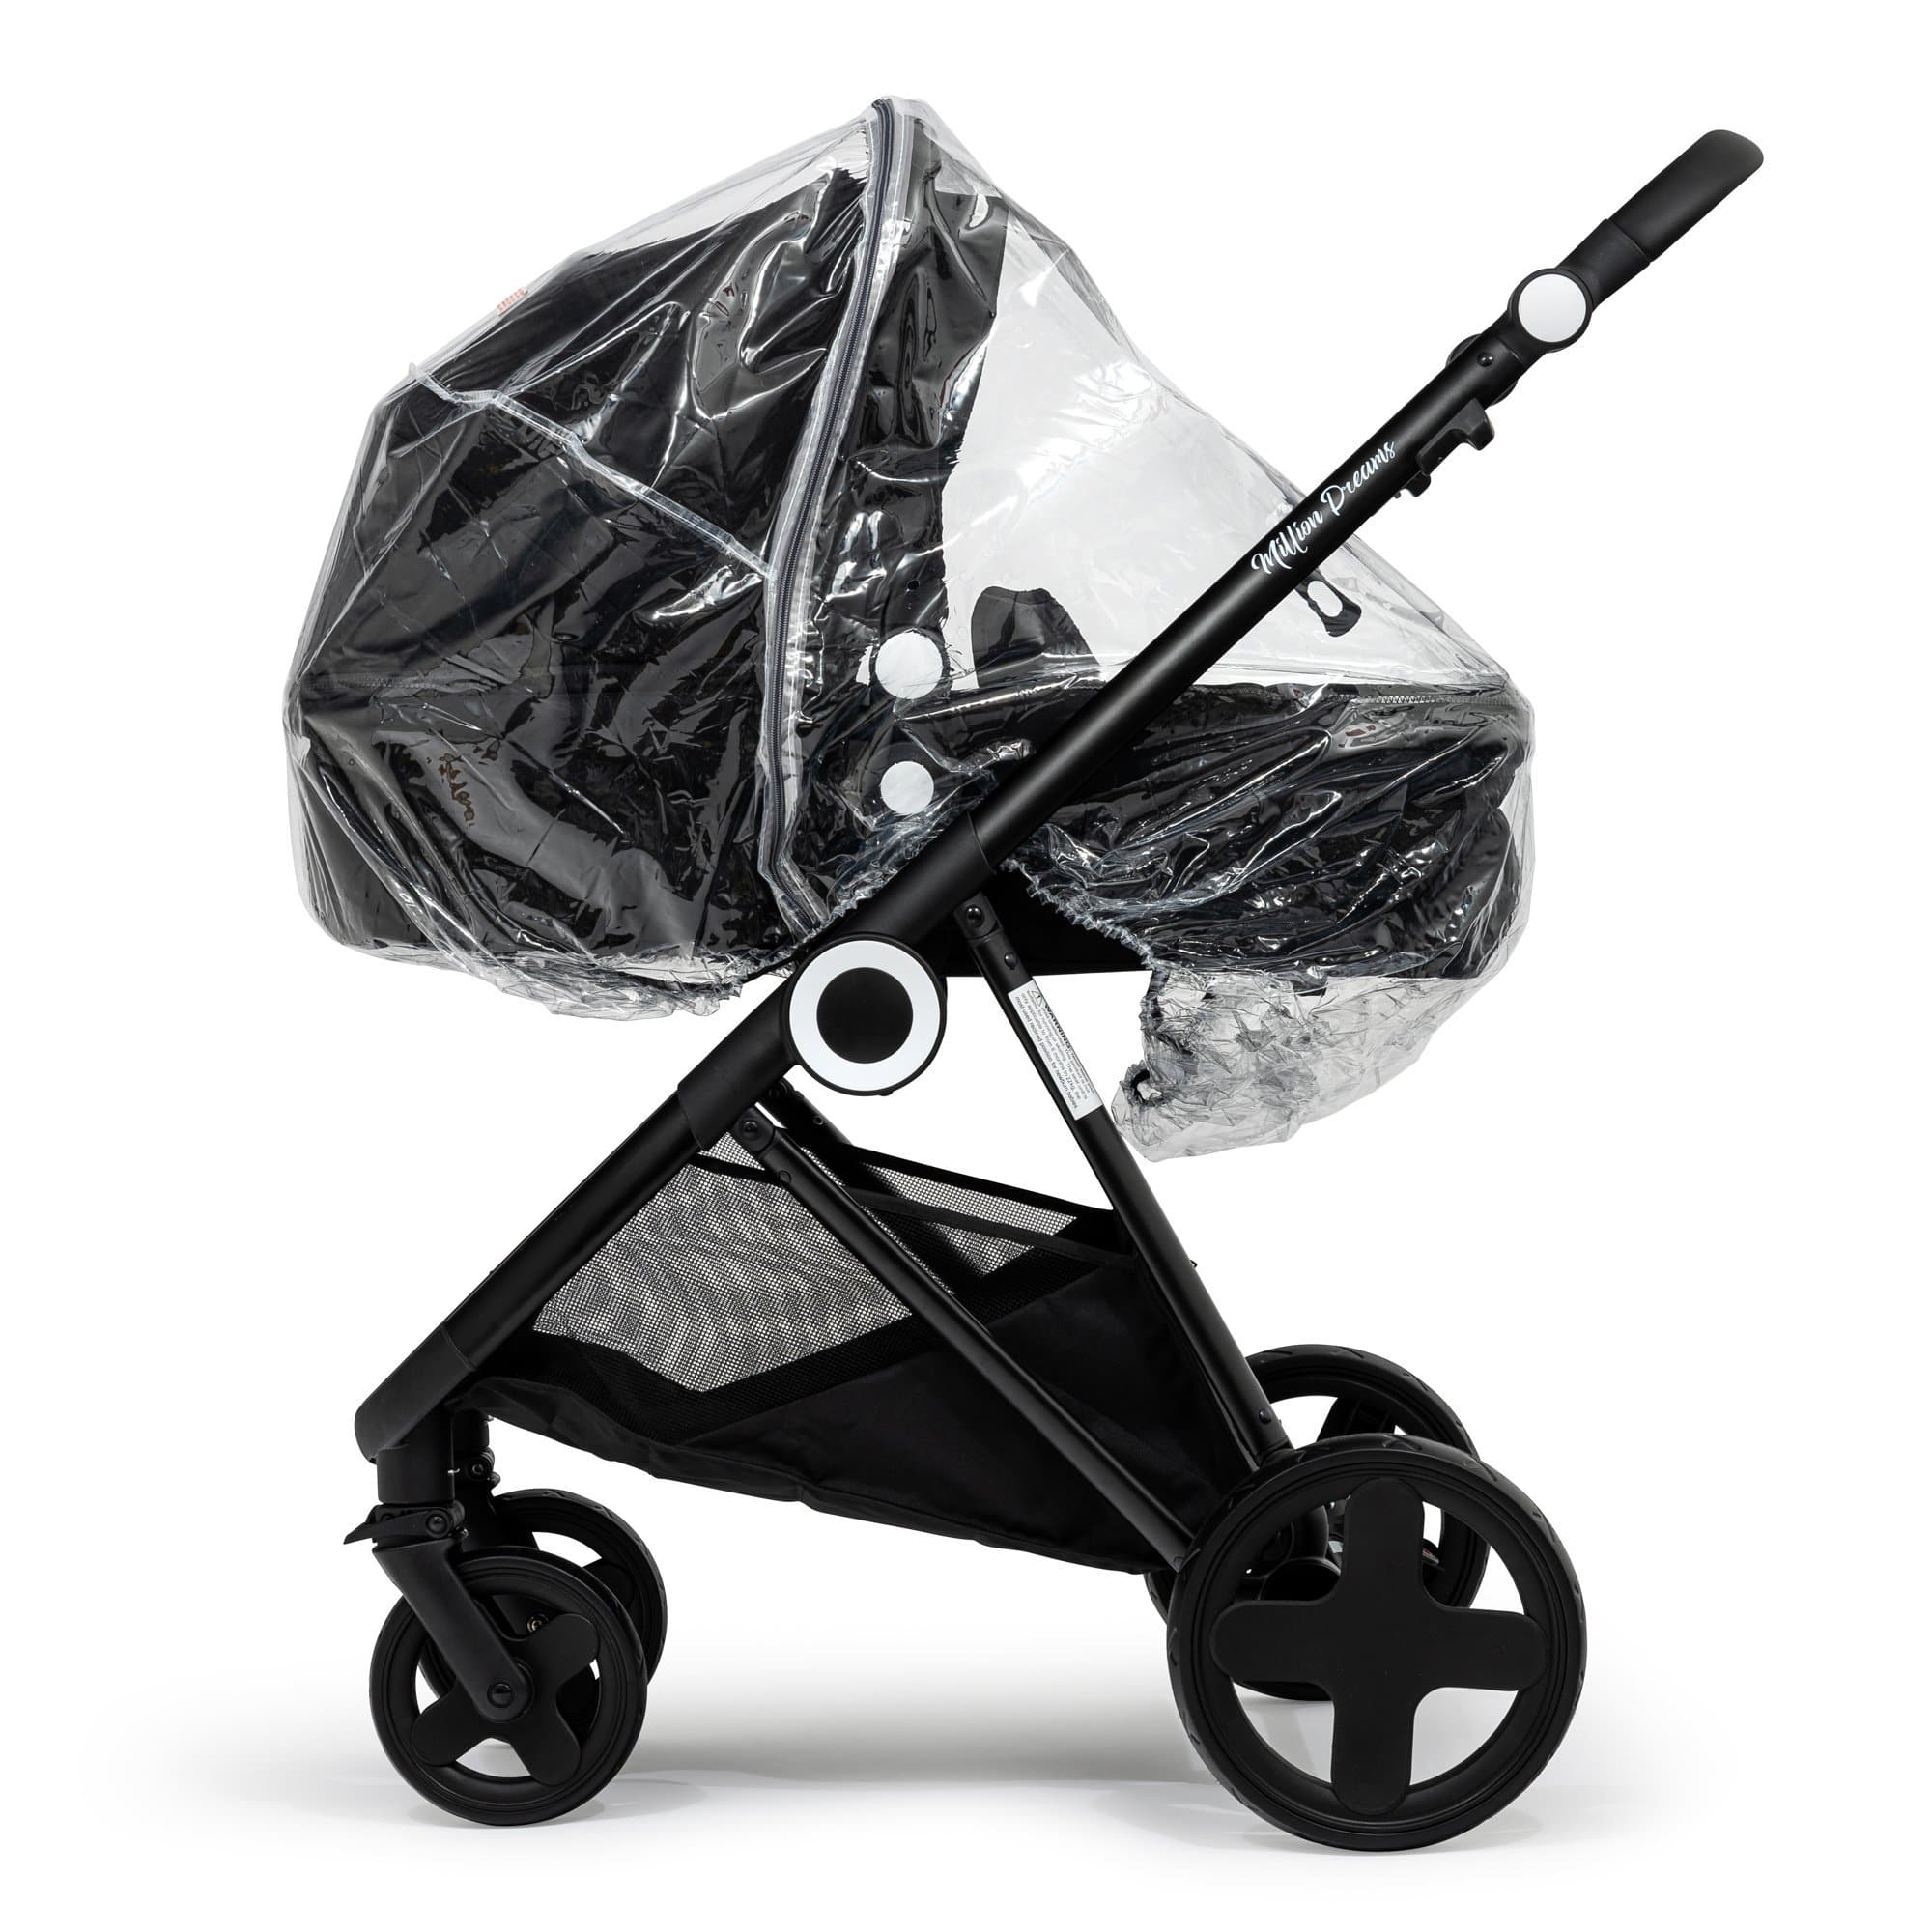 2 in 1 Rain Cover Compatible with Roma - Fits All Models - For Your Little One